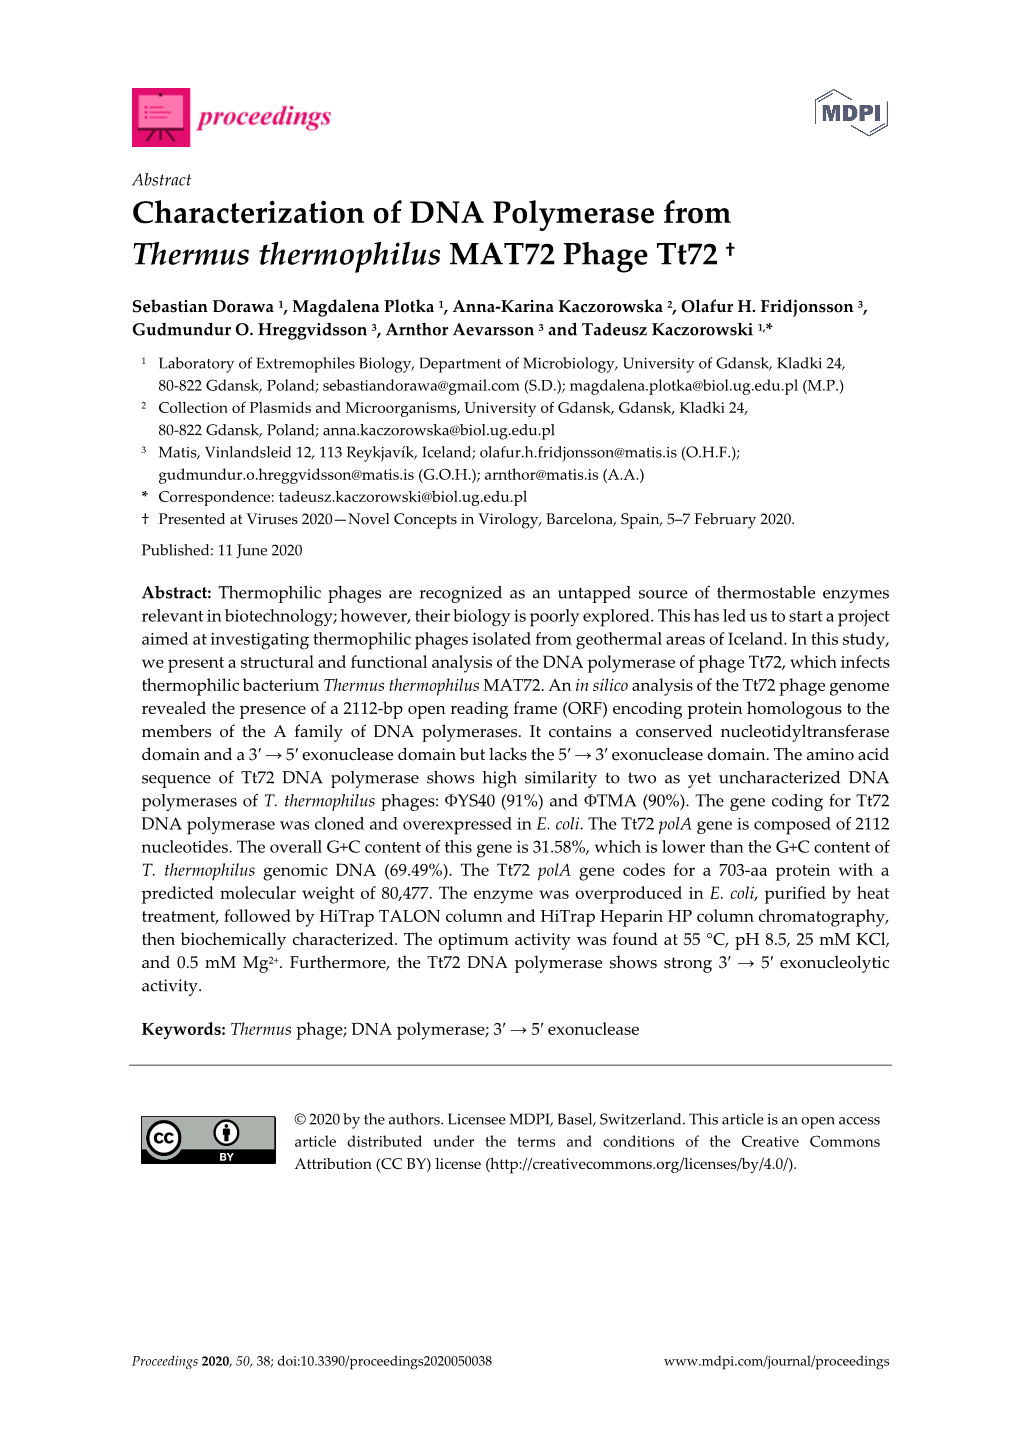 Characterization of DNA Polymerase from Thermus Thermophilus MAT72 Phage Tt72 †